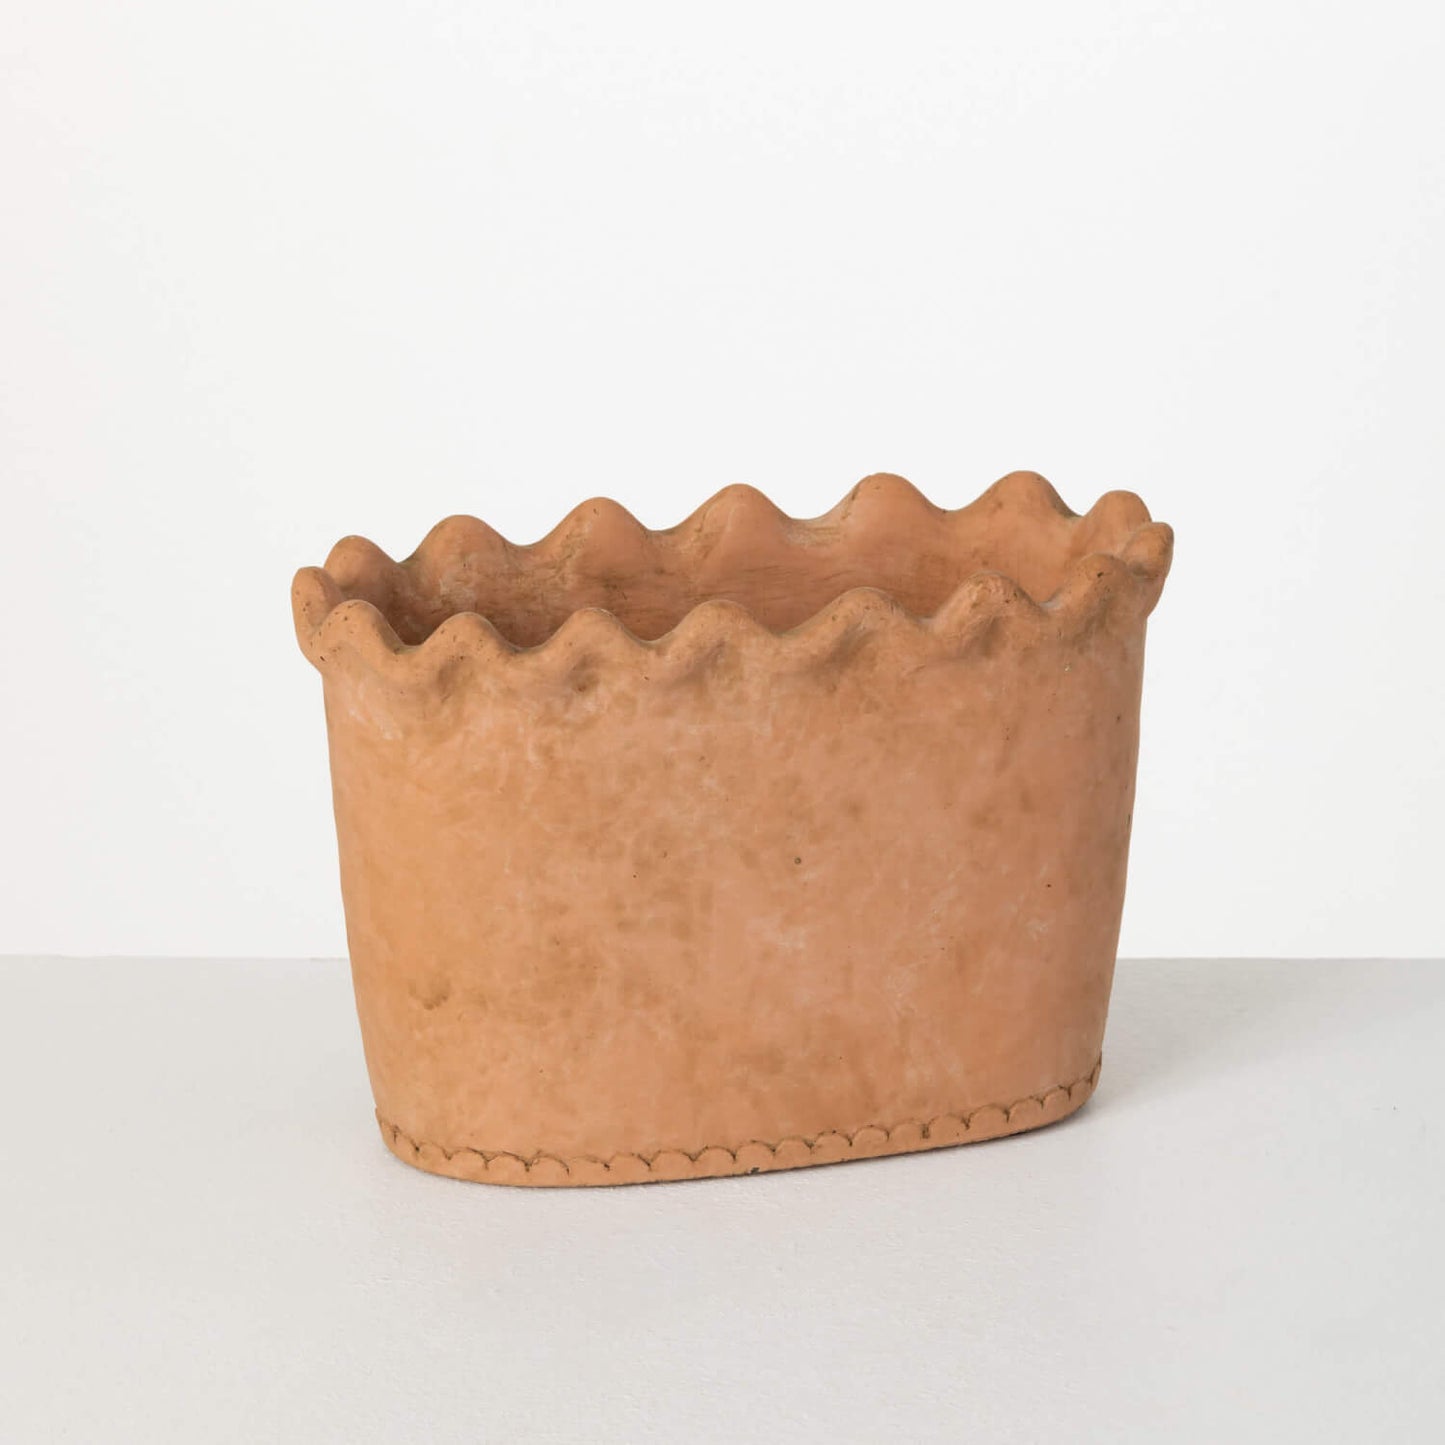 oval terracotta planter with ruffled edge on white background.